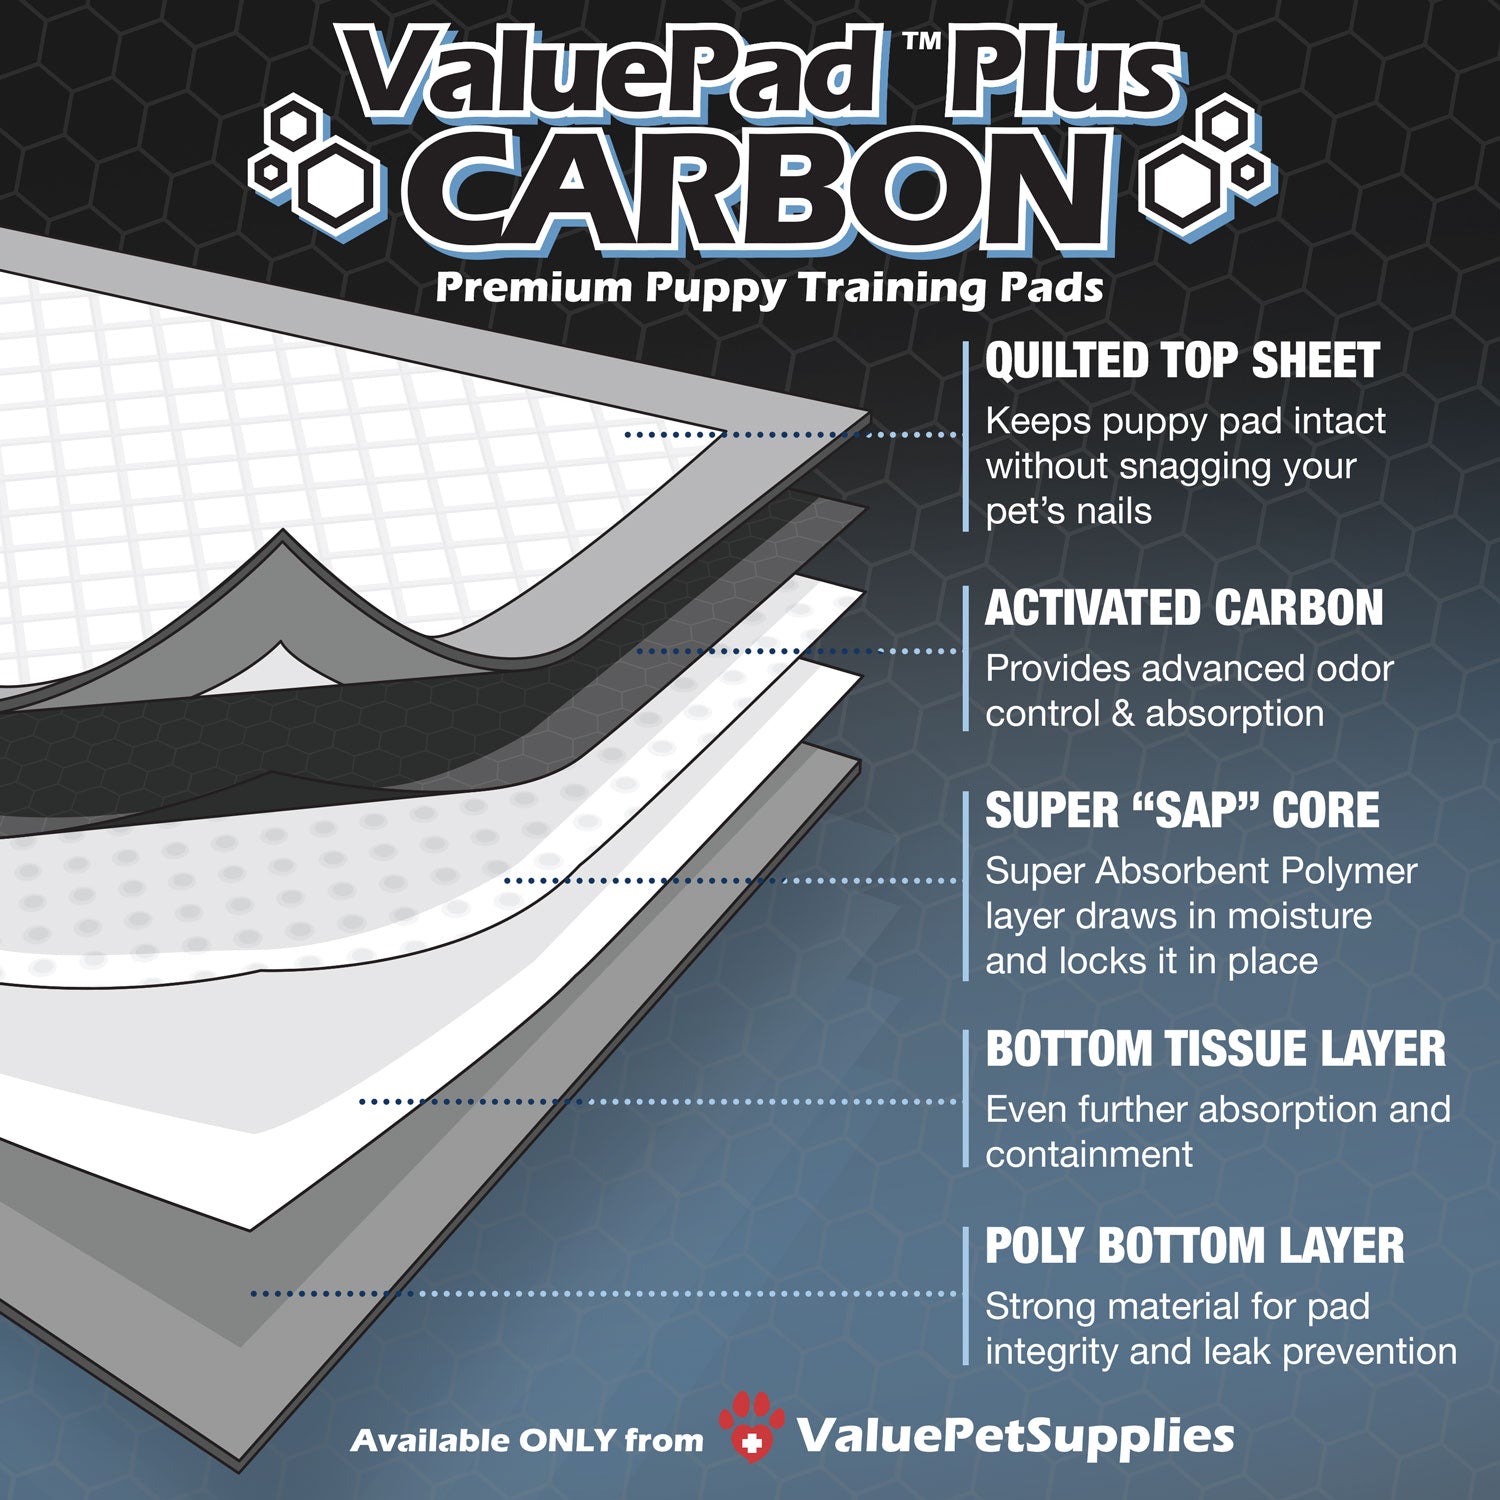 ValuePad Ultra Carbon Puppy Pads, Large 28x30 Inch, 25 Count